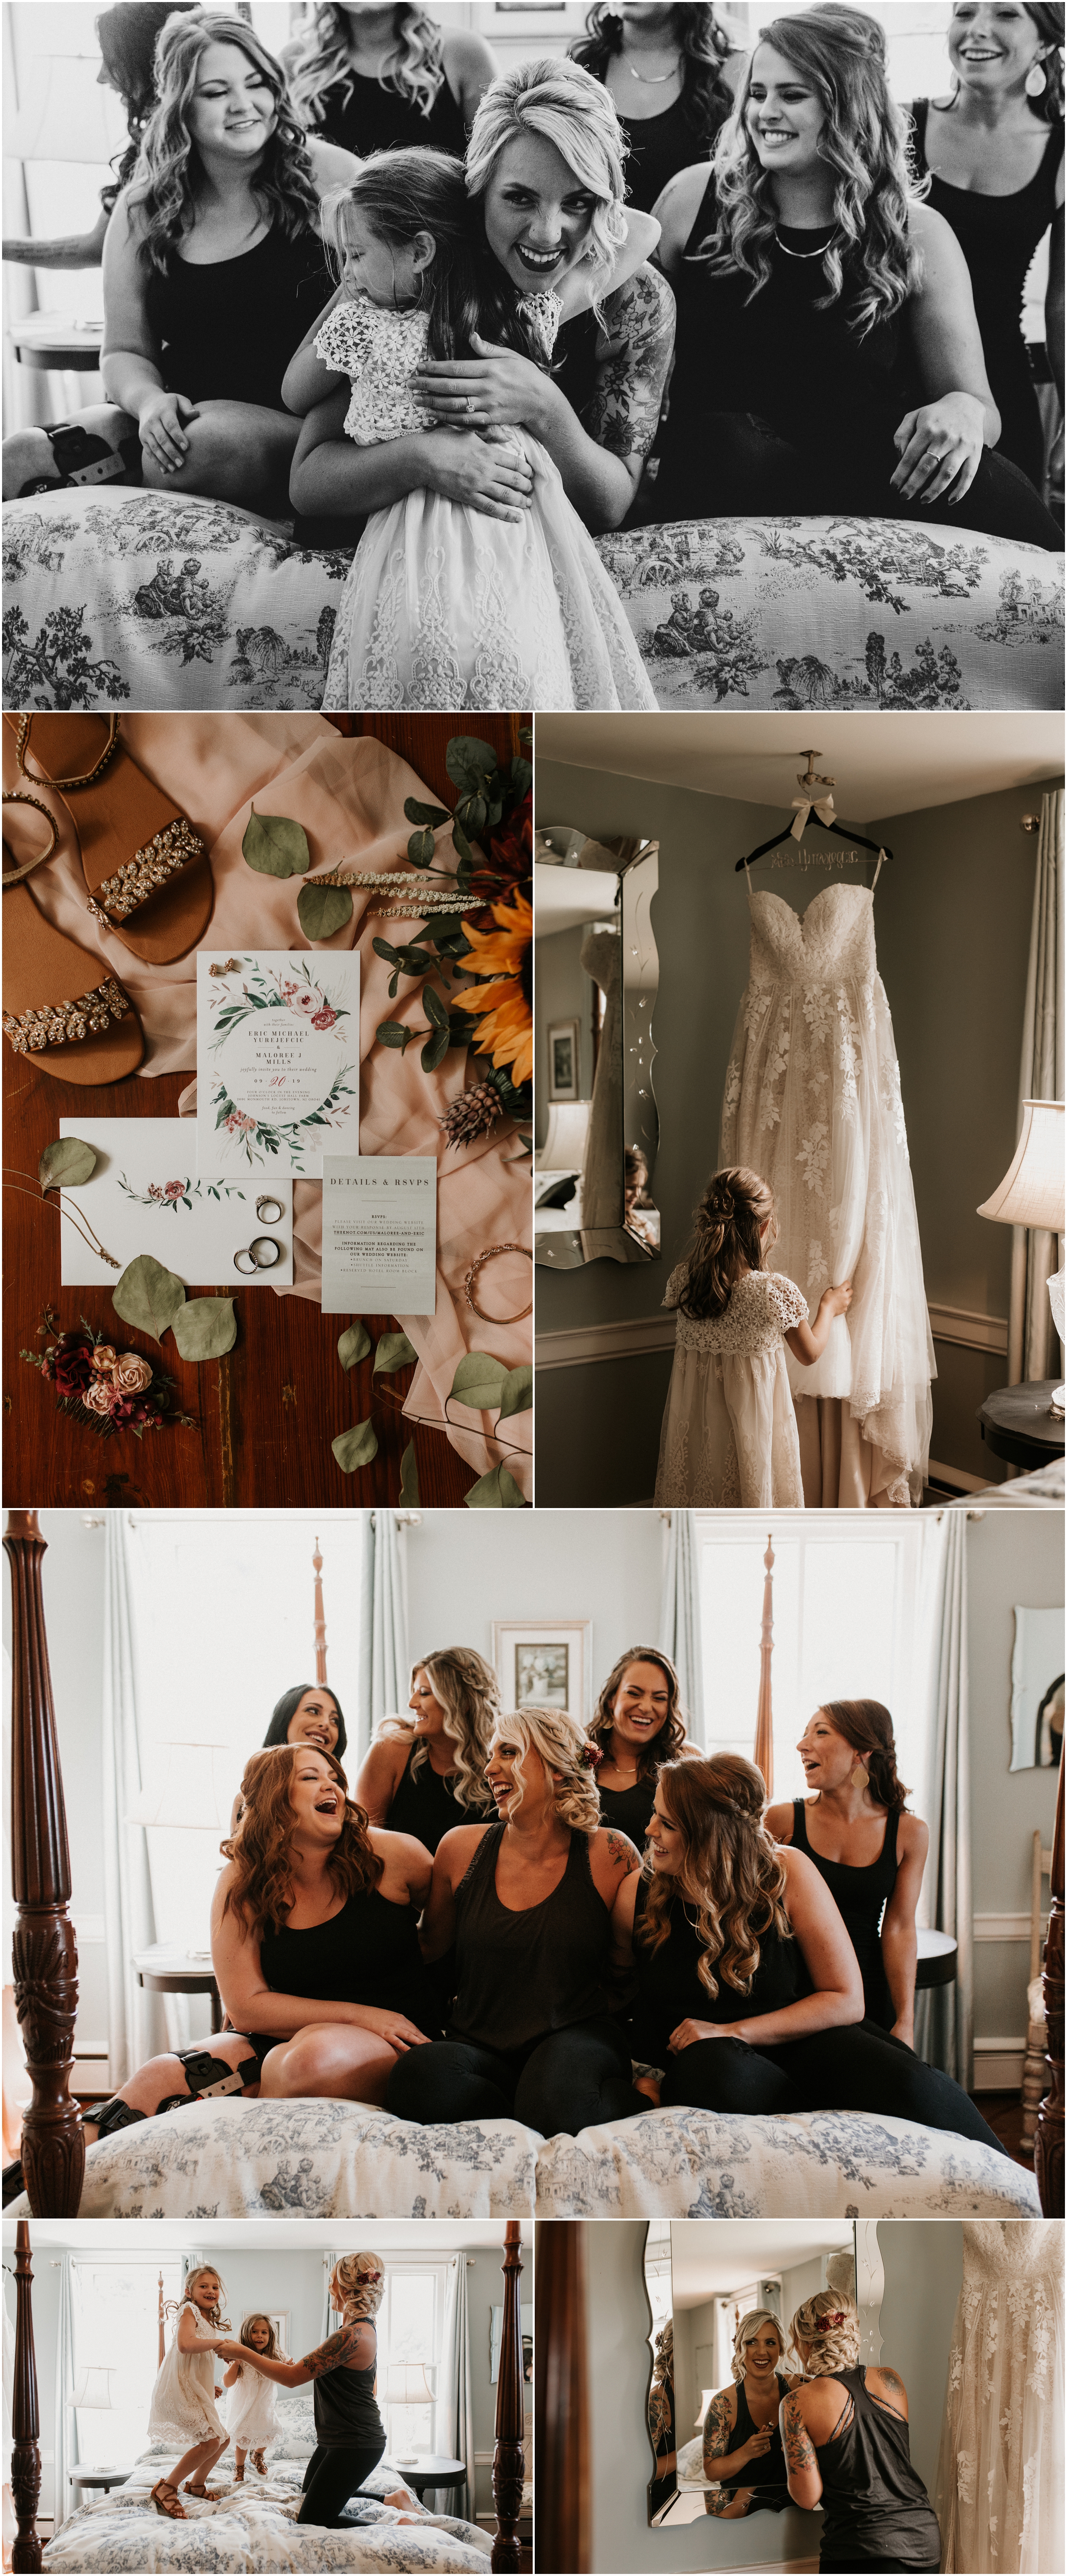 bride's wedding gown hanging, bridesmaids laughing on bed